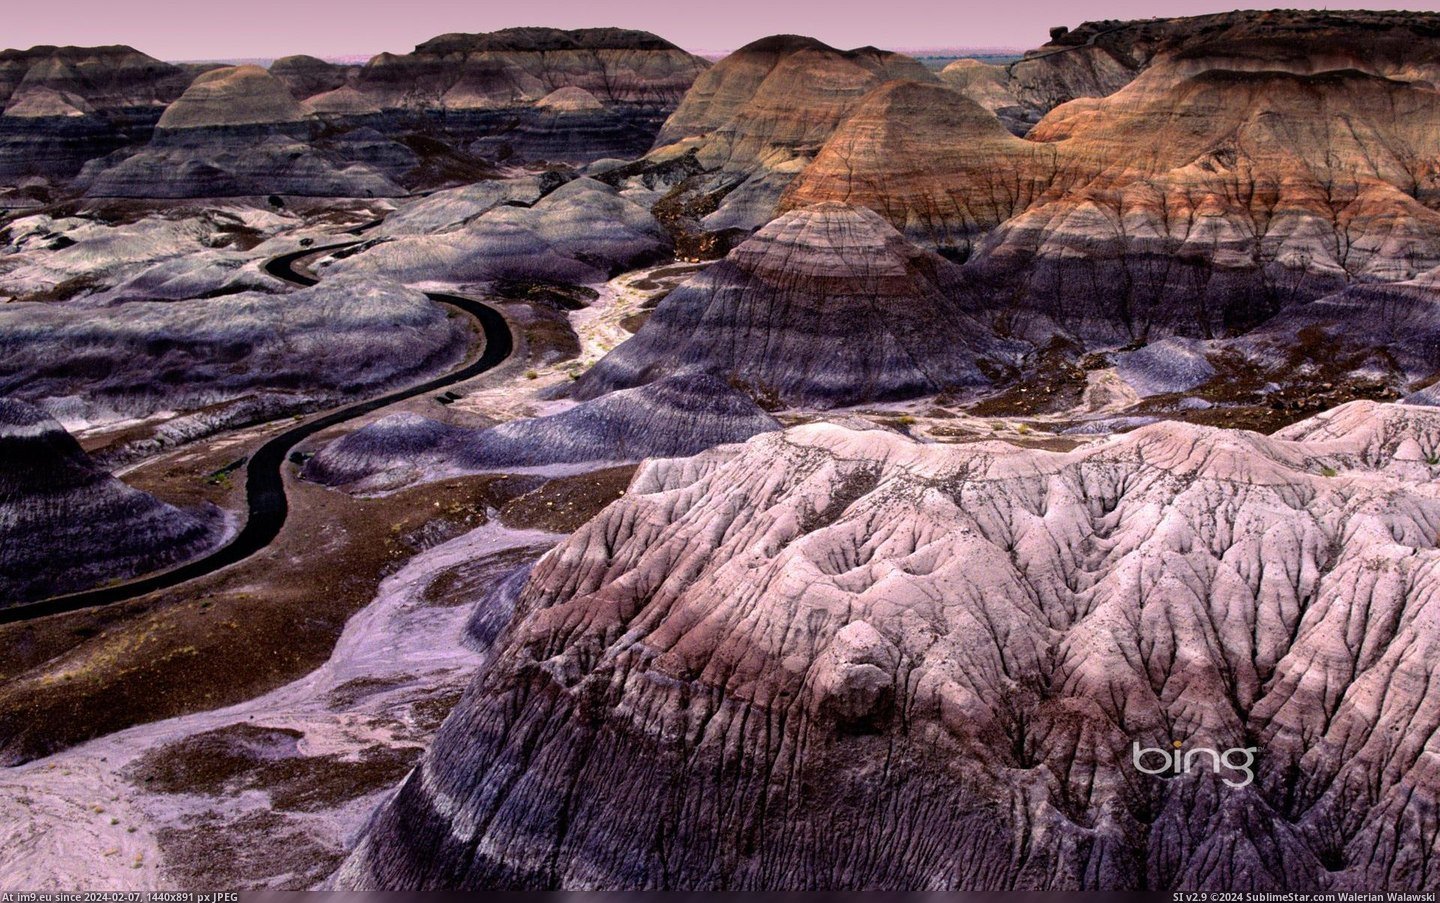 Painted Desert in the Petrified Forest National Park, Arizona (©Getty Images) (in December 2012 HD Wallpapers)